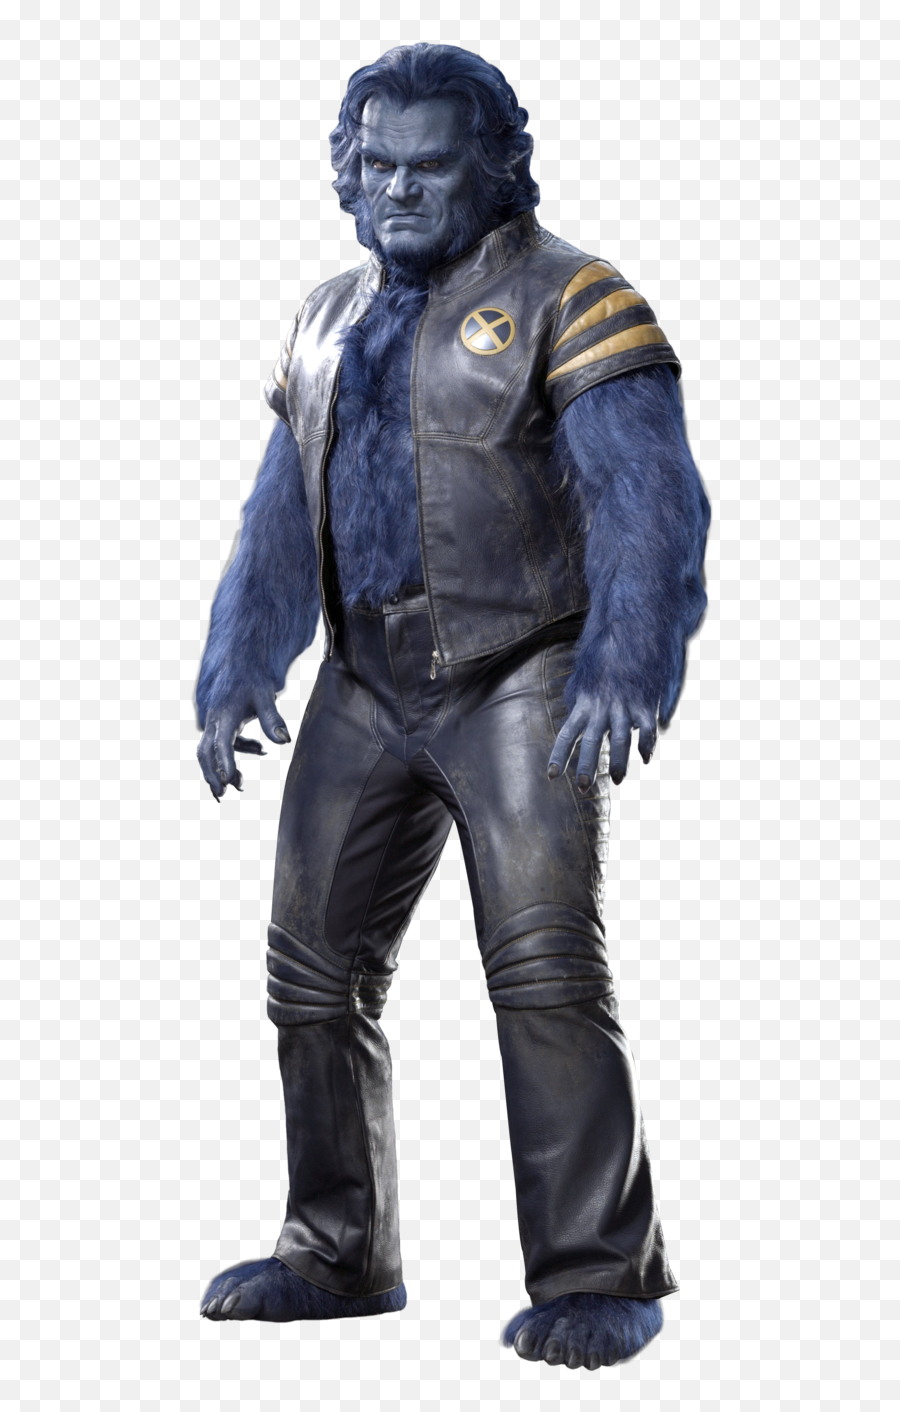 Png Fera - Kelsey Grammer Beast Days Of Future Past,Xmen Png